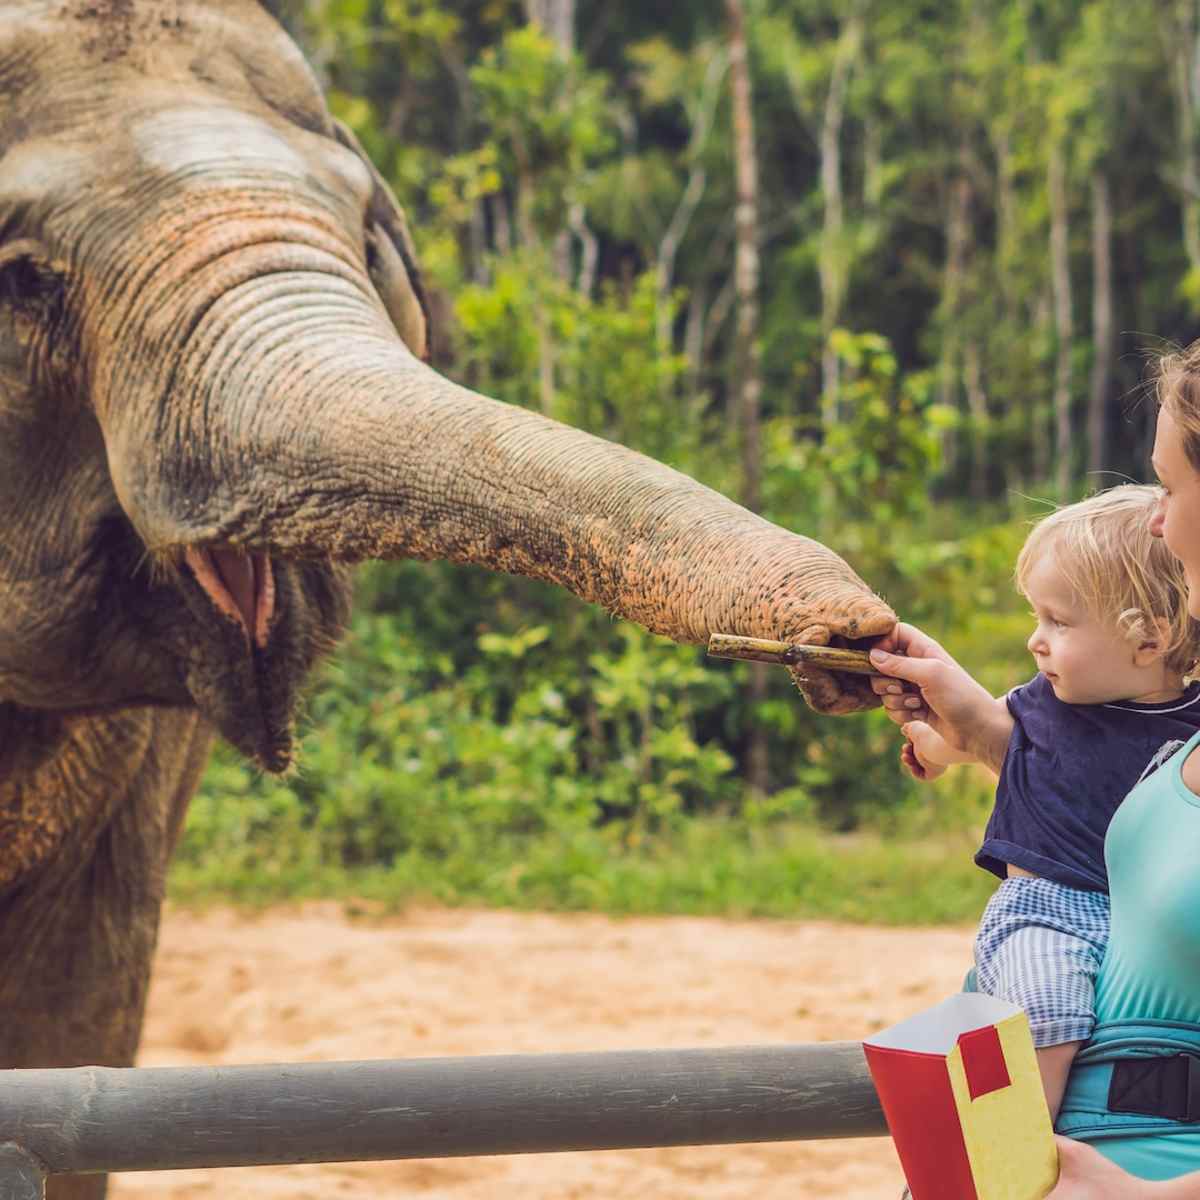 Elephant Returns Child's Shoe After It Falls Into Zoo Enclosure in Moment of Pure Sweetness - PetHelpful News